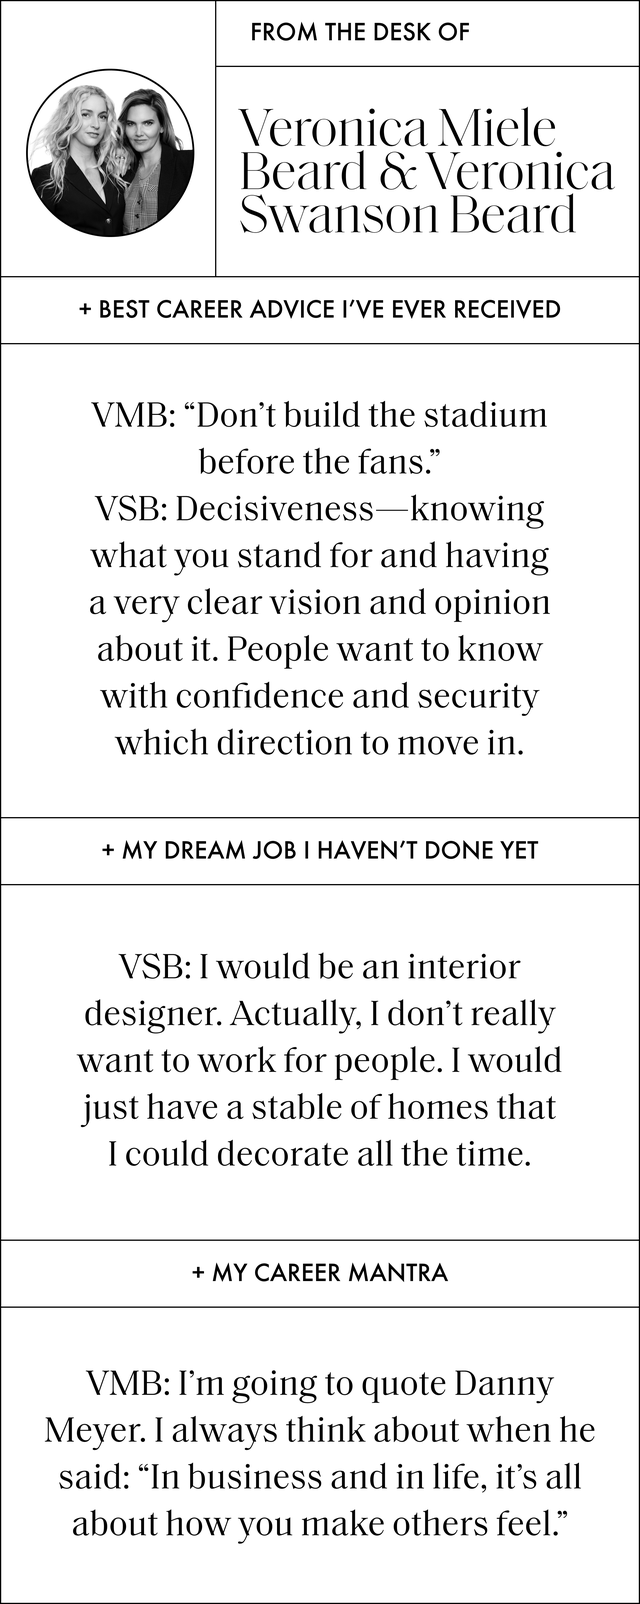 a q and a that reads best career advice i have ever received vmb don’t build the stadium before the fans vsb decisiveness—knowing what you stand for and having a very clear vision and opinion about it people want to know with confidence and security which direction to move in my dream job i havent done yet vsb i would be an interior designer actually, i don’t really want to work for people i would just have a stable of homes that i could decorate all the time my career mantra vmb i’m going to quote danny meyer i always think about when he said in business and in life, it’s all about how you make others feel